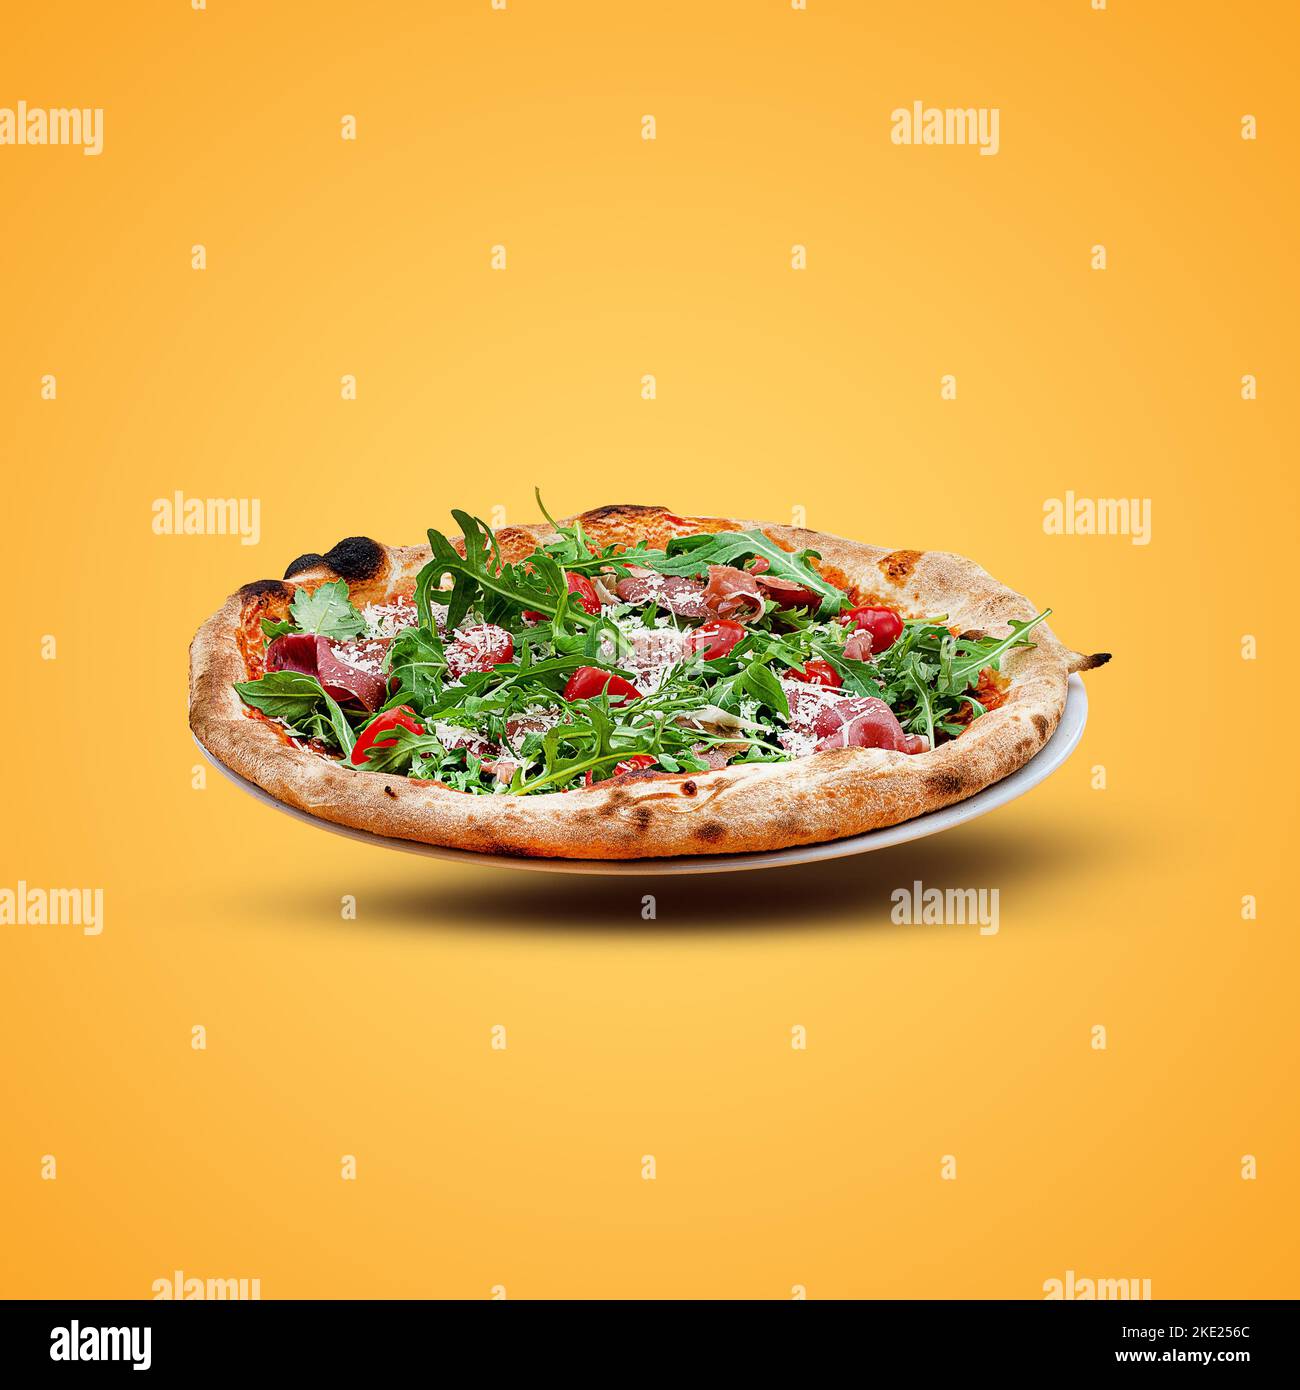 Homemade Italian pizza on a yellow background. Pizza parma. Top view. Stock Photo